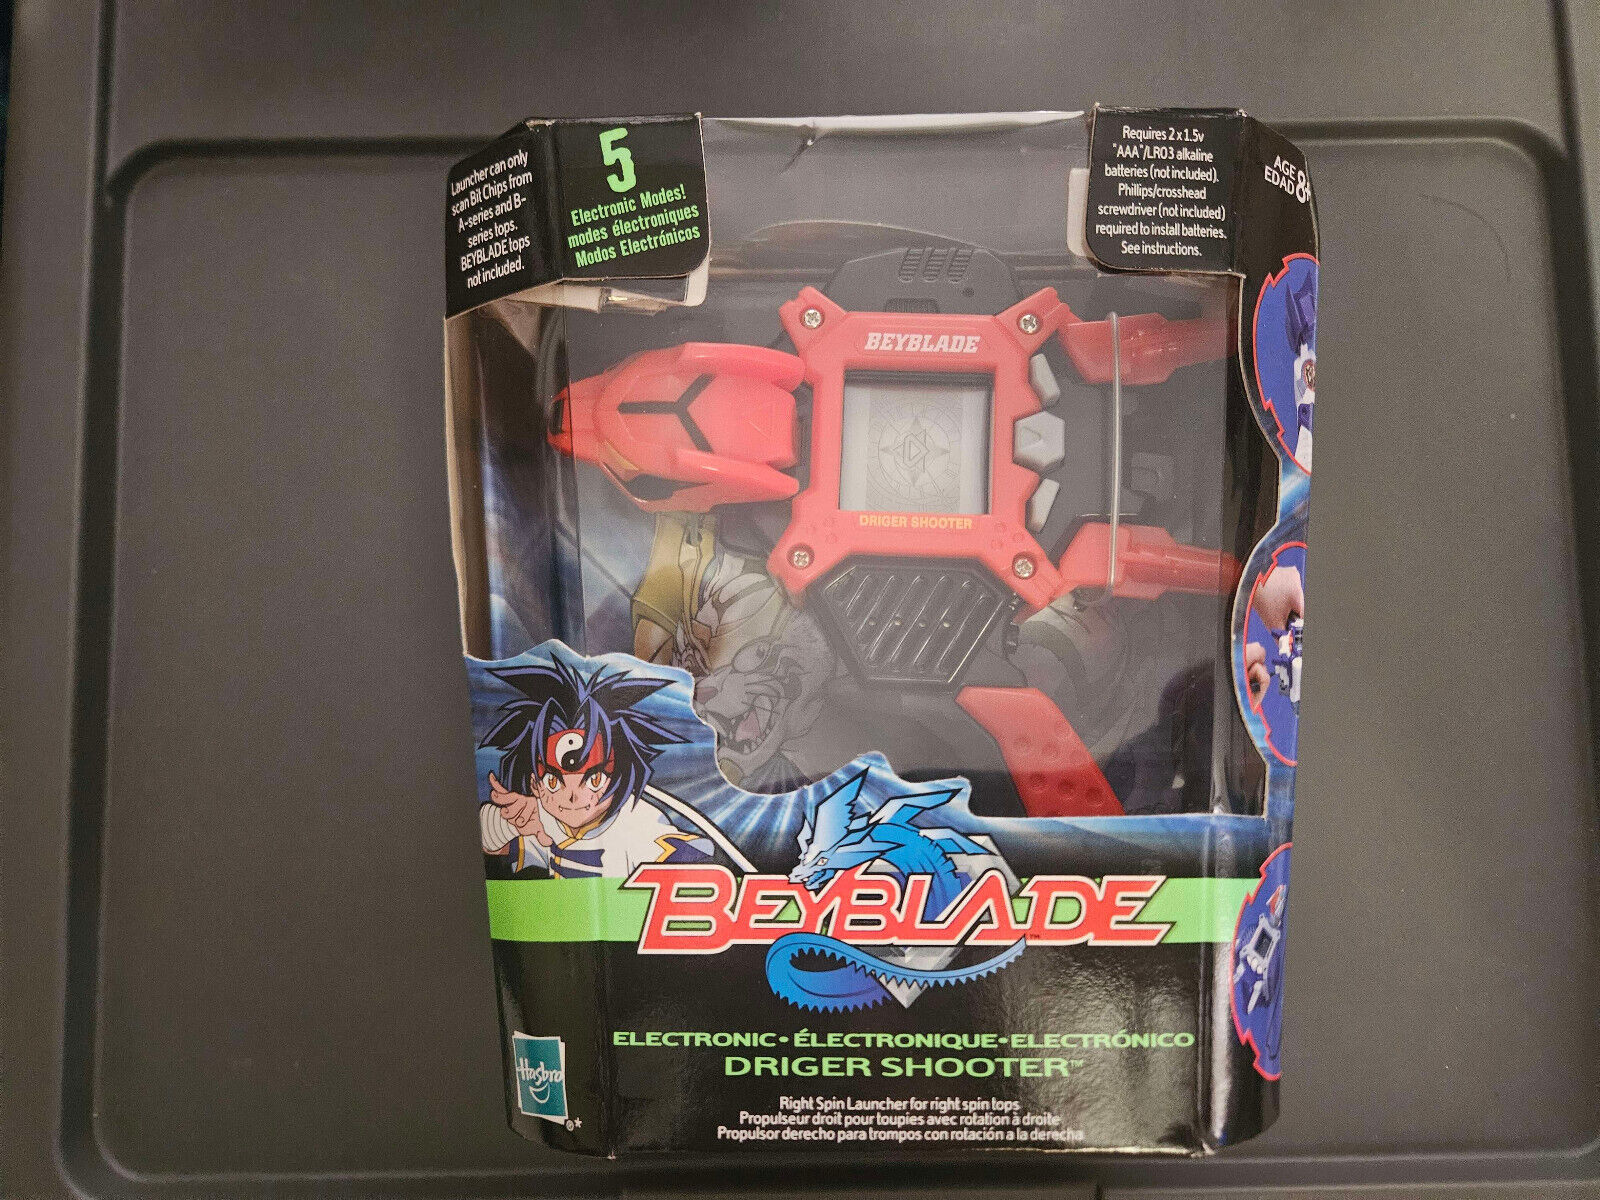 Beyblade Electronic Driger Shooter DX Launcher Brand New Sealed